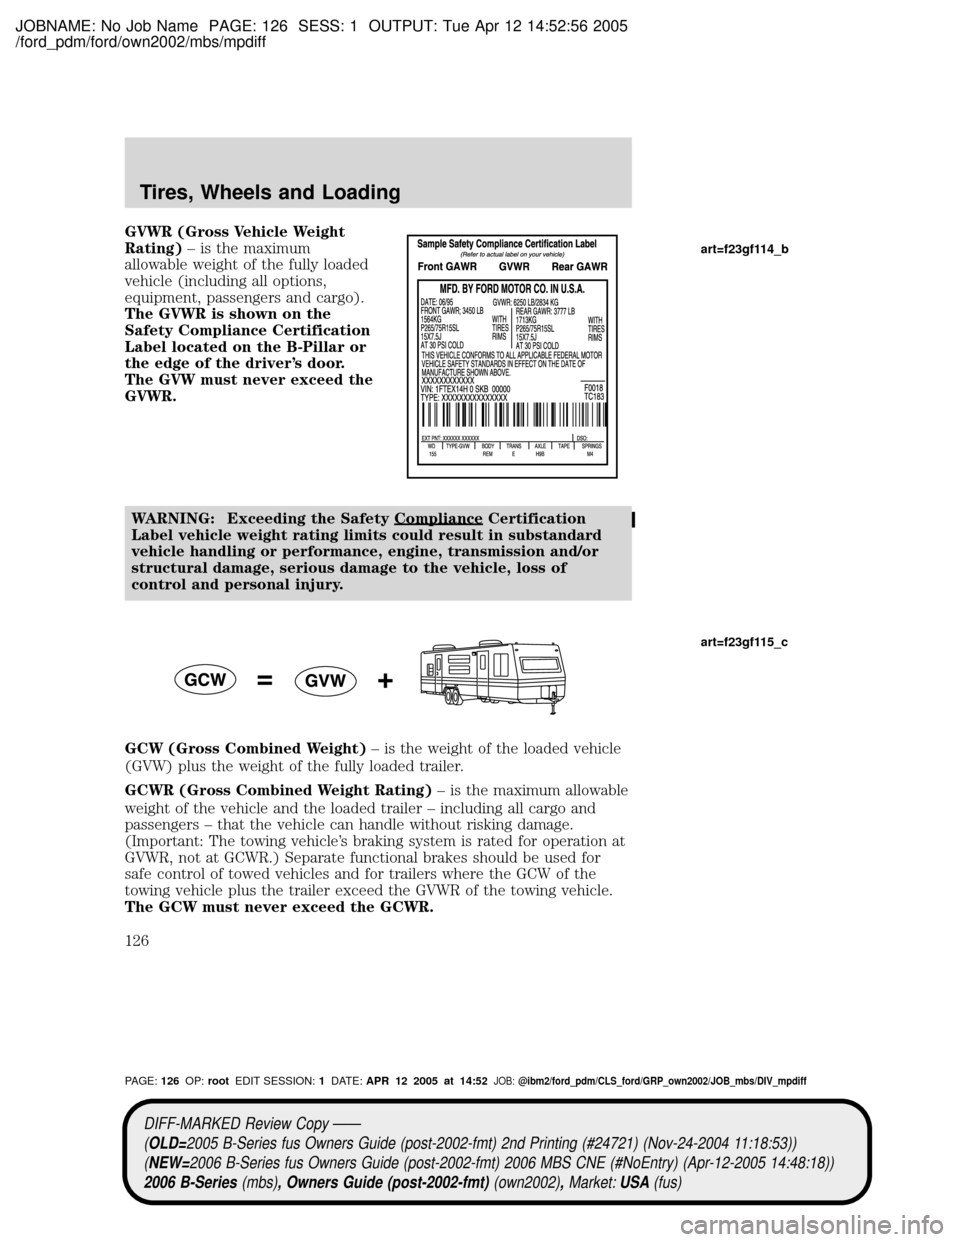 MAZDA MODEL B2300 TRUCK 2006  Owners Manual (in English) JOBNAME: No Job Name PAGE: 126 SESS: 1 OUTPUT: Tue Apr 12 14:52:56 2005
/ford_pdm/ford/own2002/mbs/mpdiff
GVWR (Gross Vehicle Weight
Rating)± is the maximum
allowable weight of the fully loaded
vehic